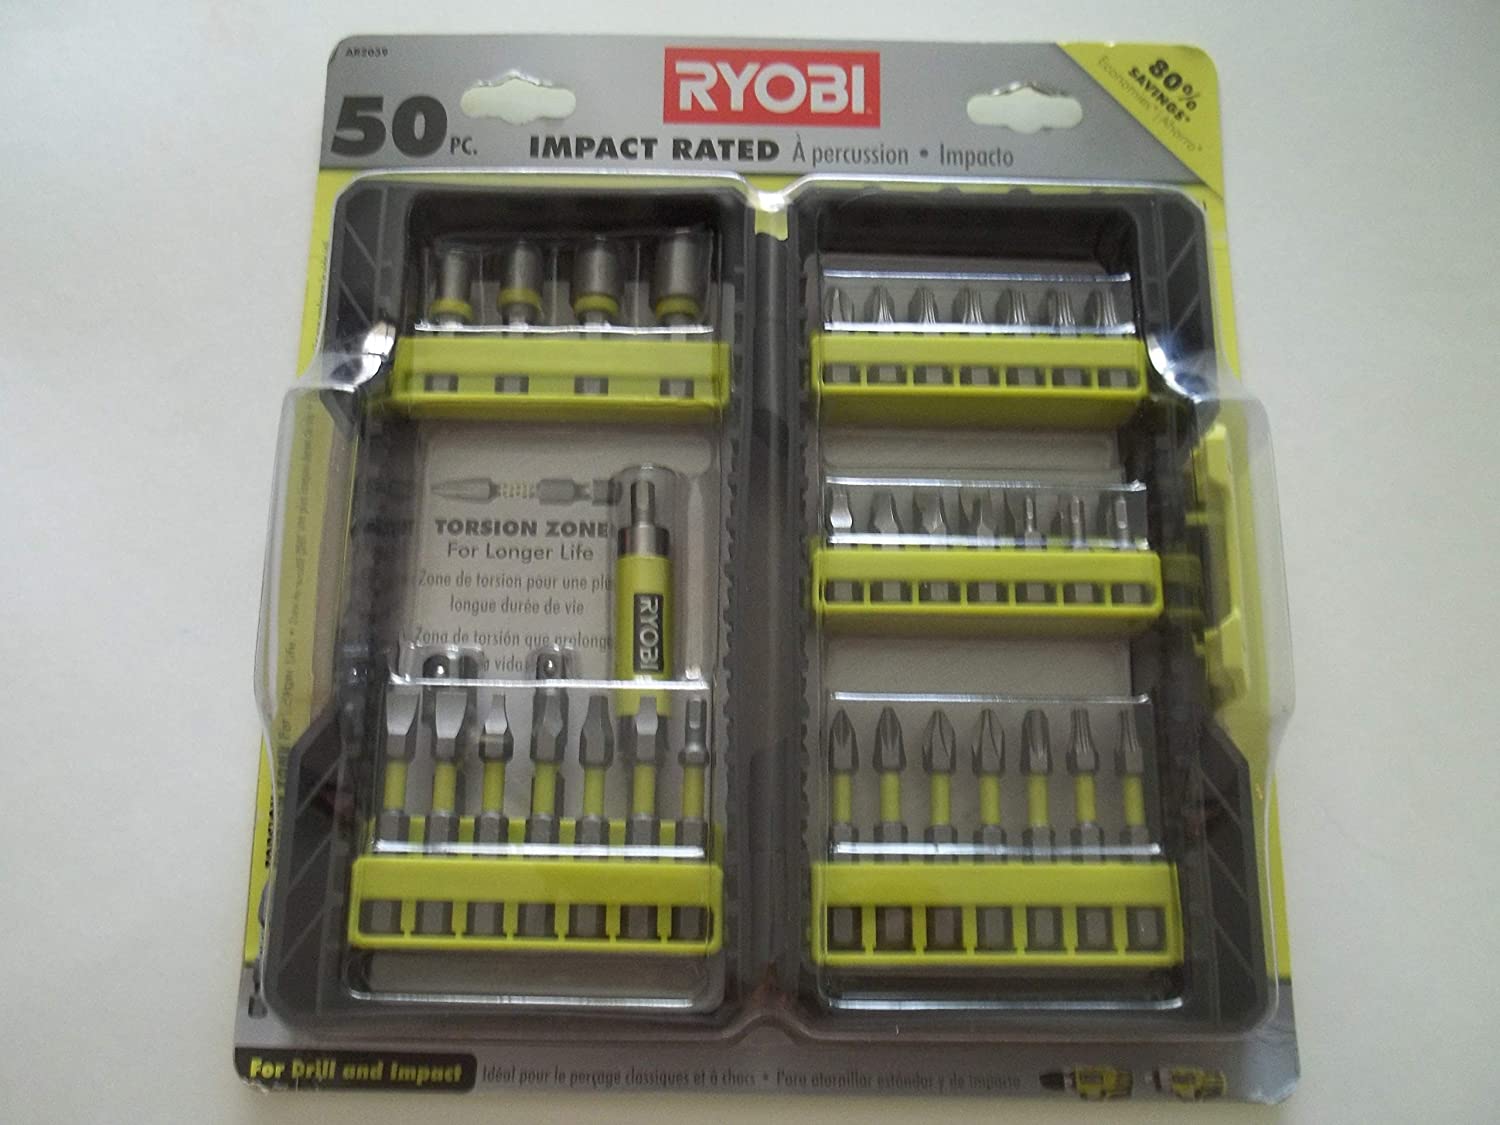 Ryobi 50 Piece Impact Rated Driving Bits with Dock-It [...]